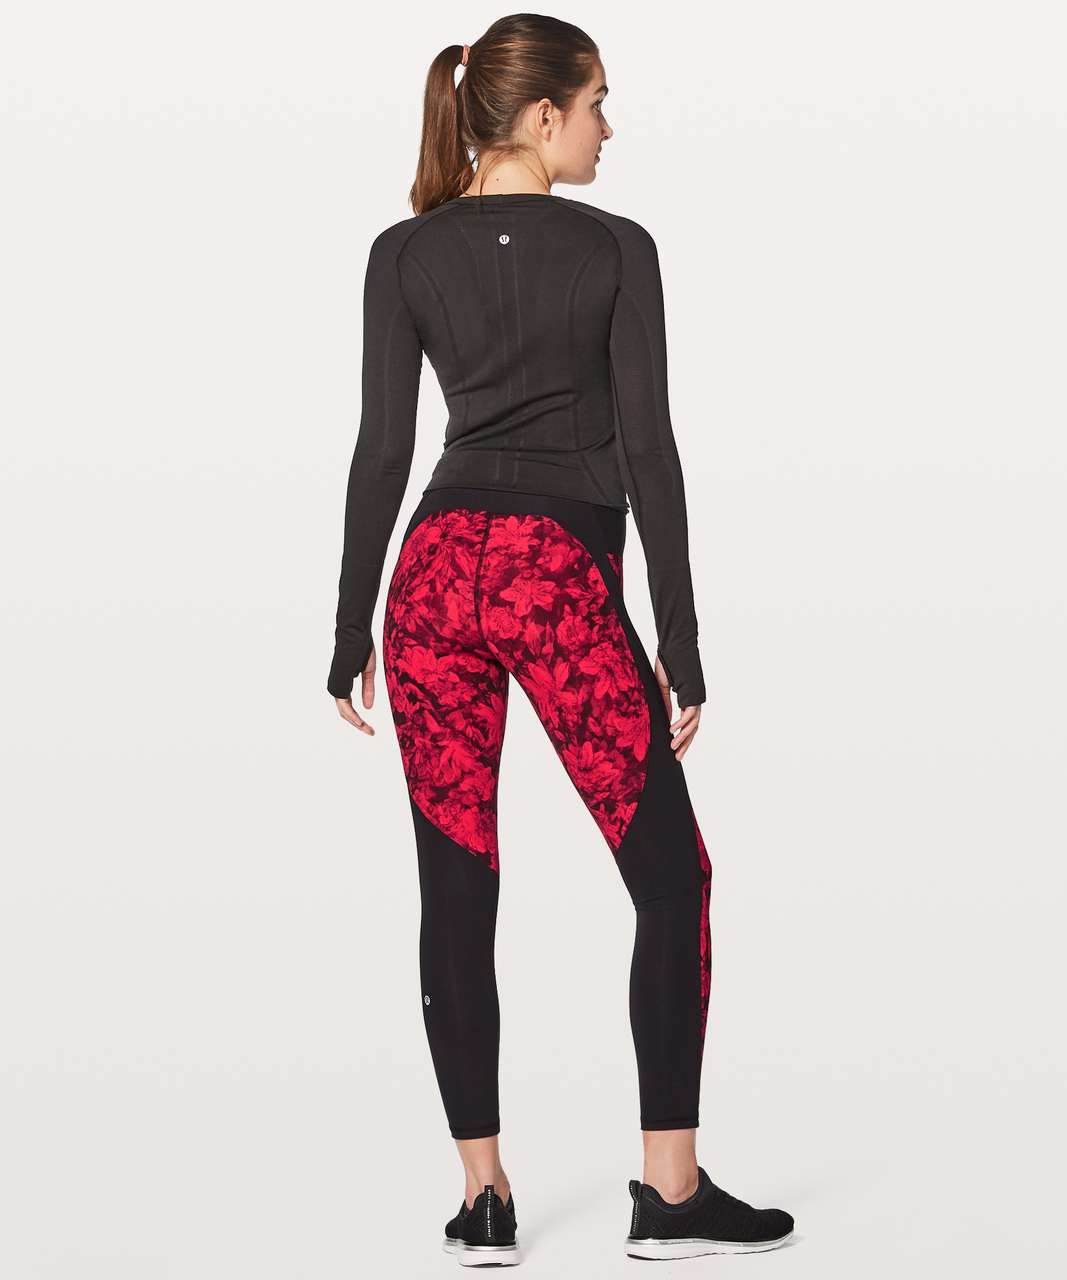 Lululemon Train Times Fast Pace Pant Special Edition 25" - Carminetrue Red Black / Black